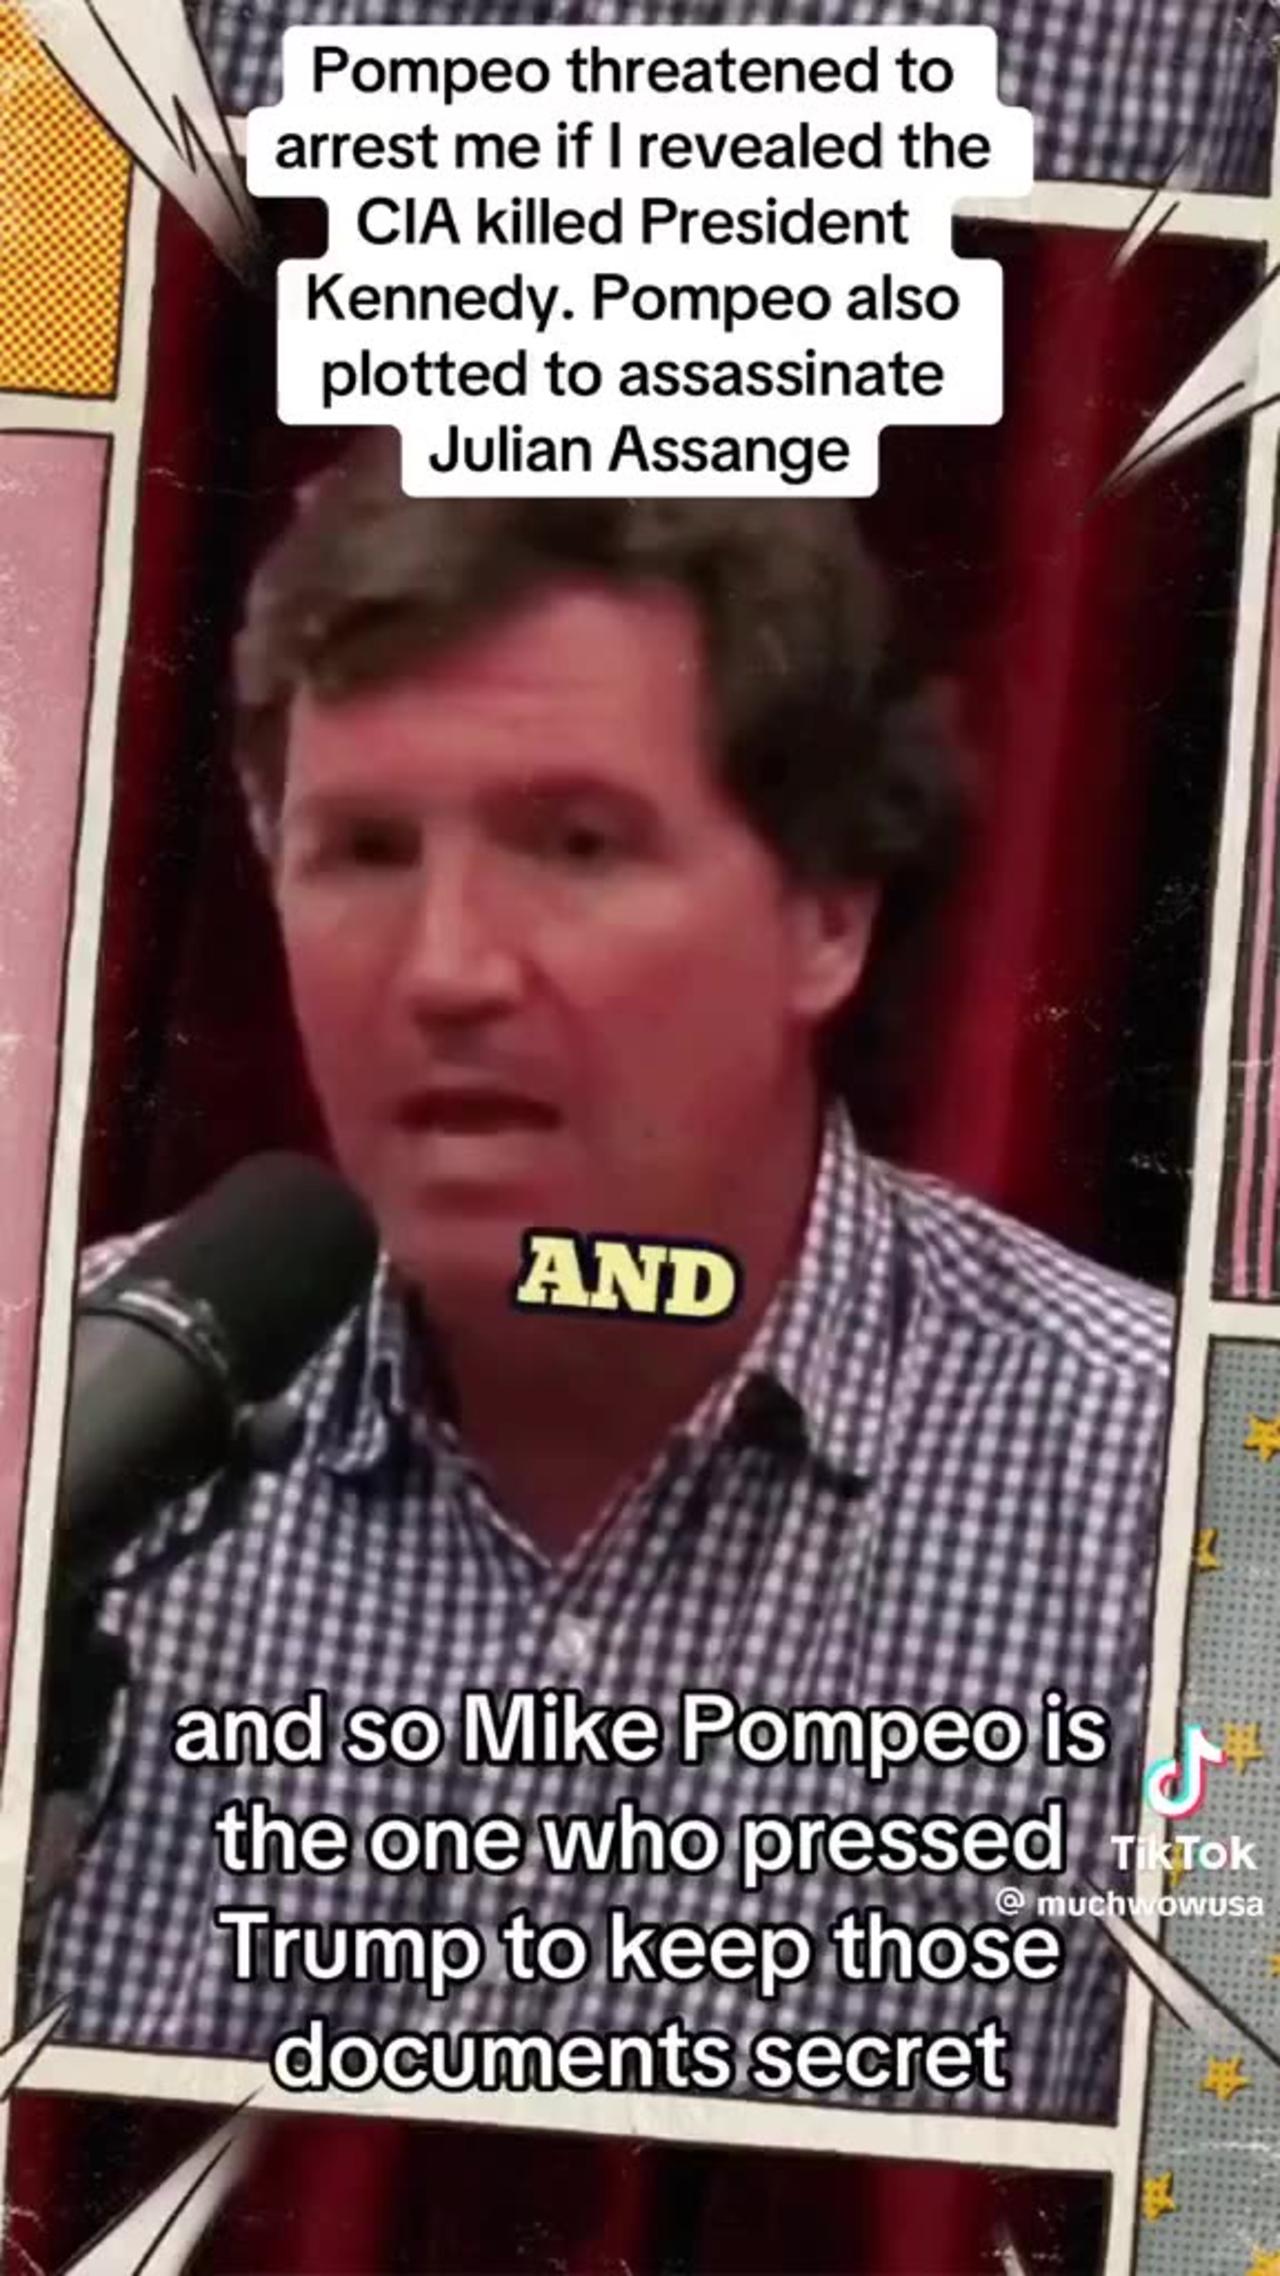 👀 Tucker Carlson Claims Mike Pompeo Plotted To Assassinate Julian Assange